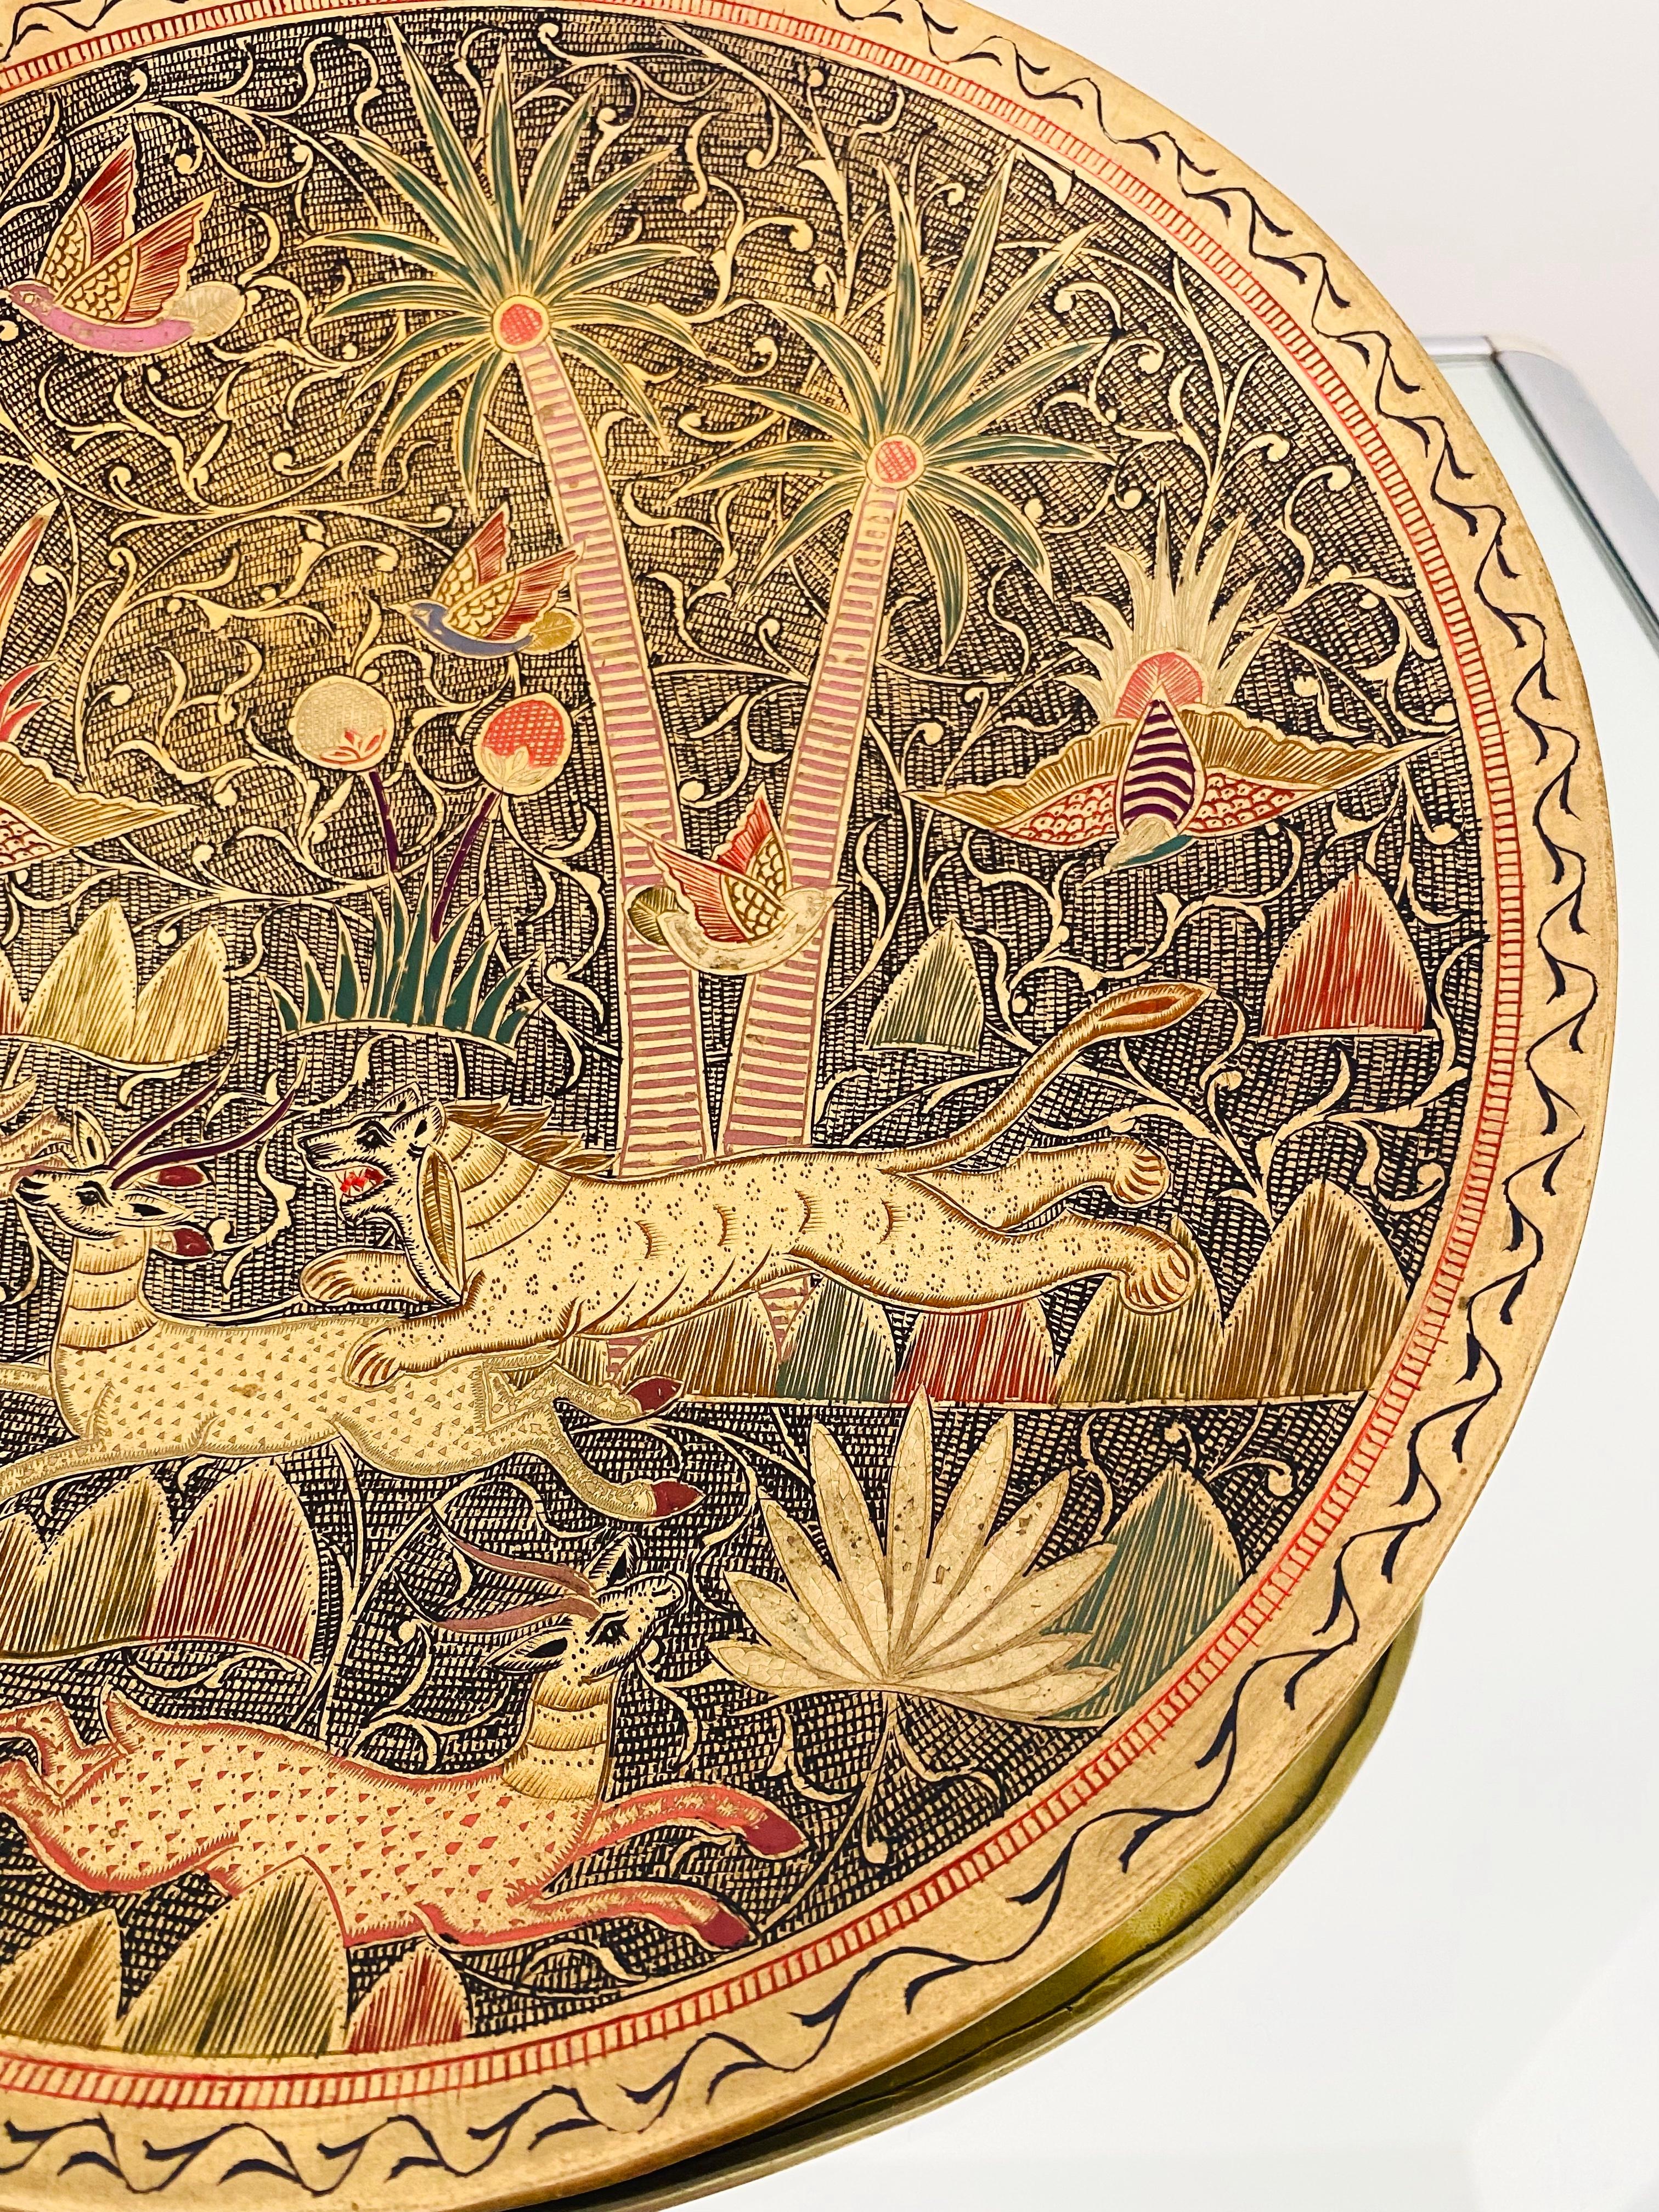 Hand-Crafted Middle Eastern Etched Brass Plate with Exotic Animals and Plants